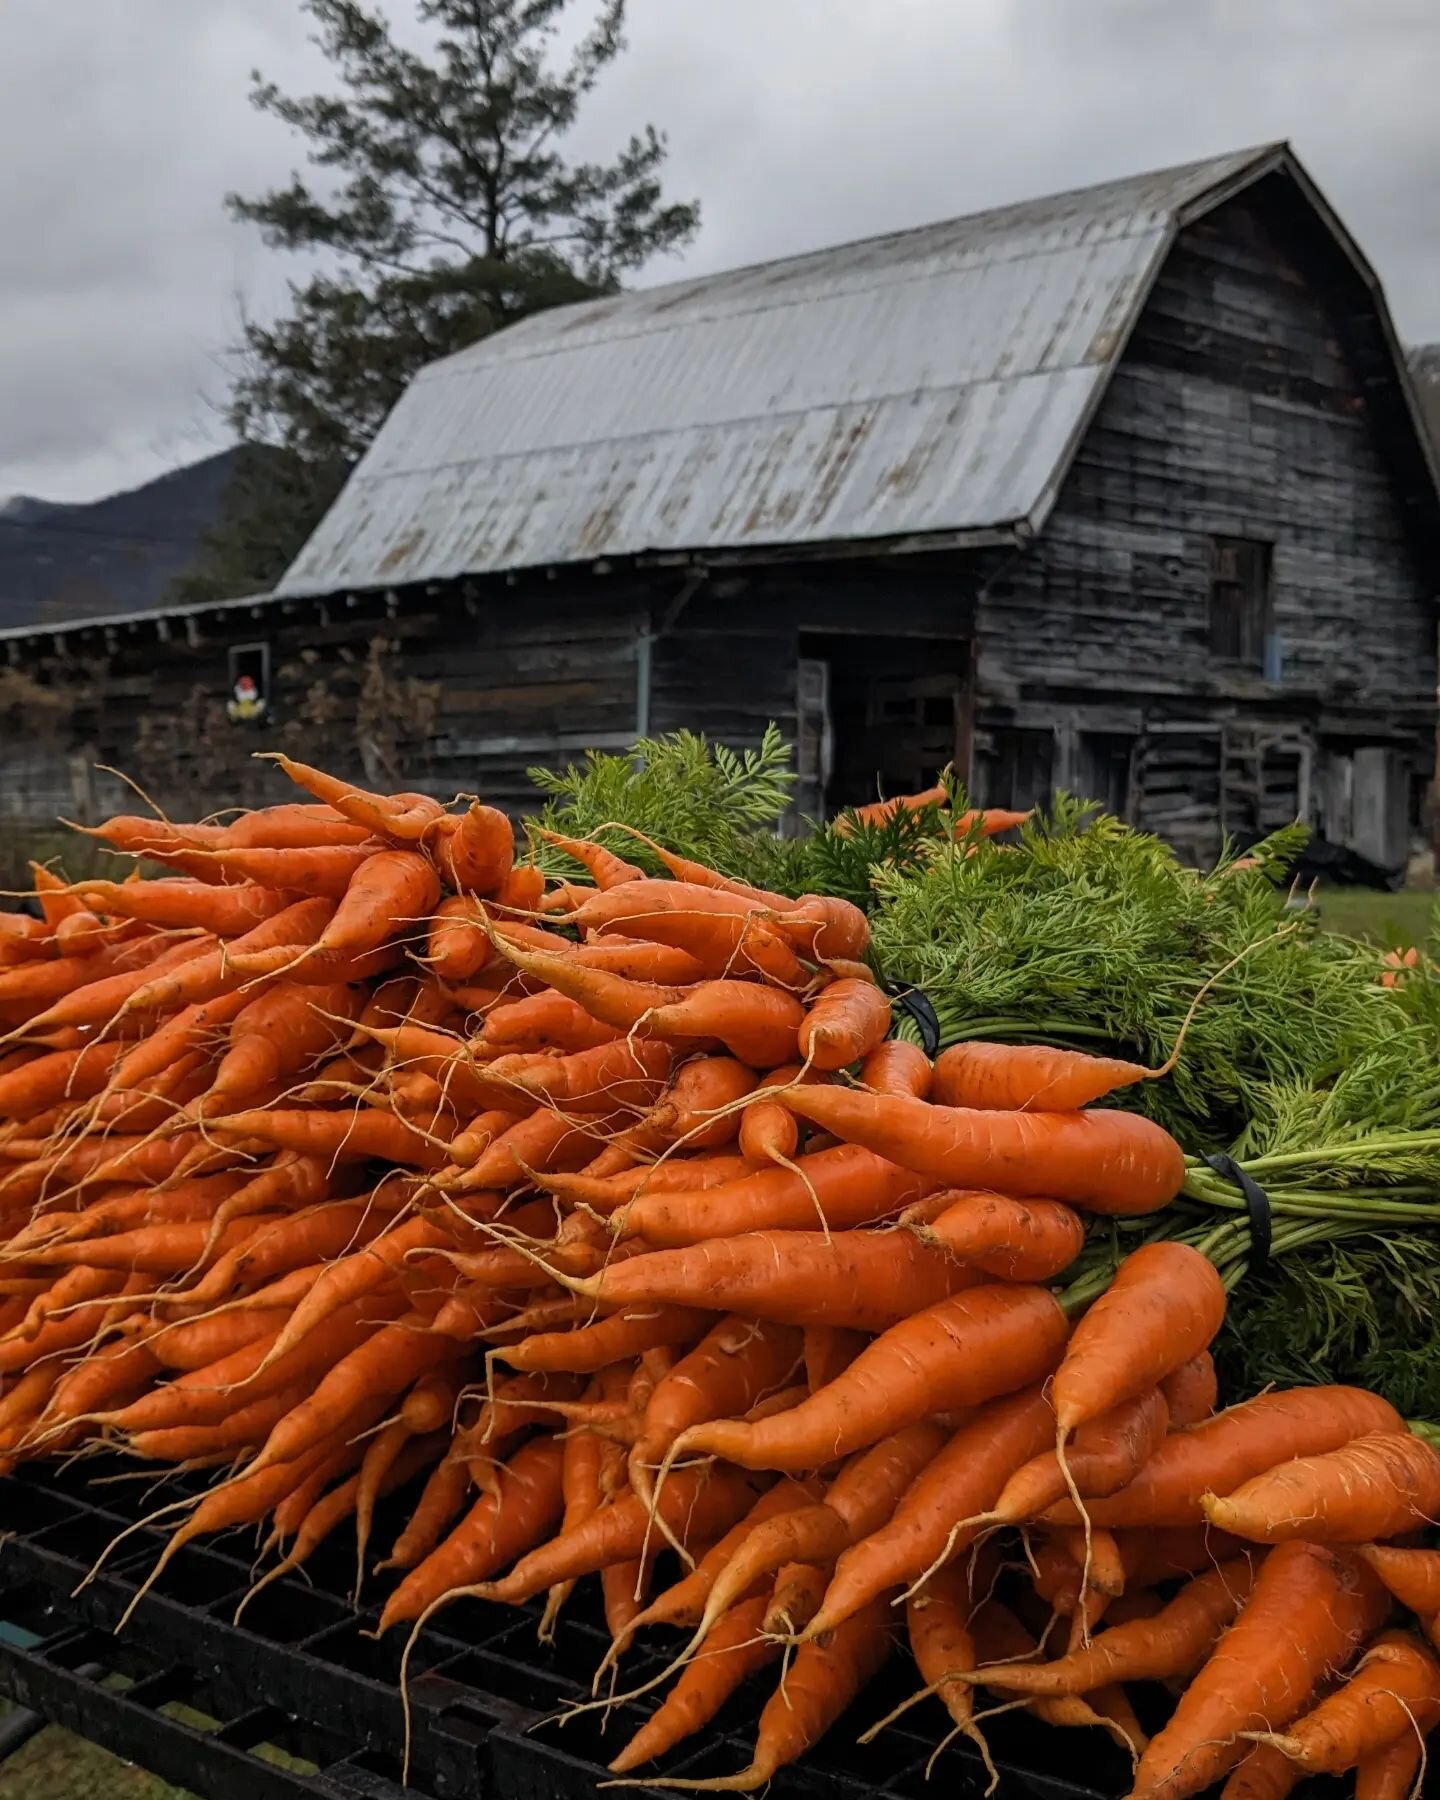 Carrots bringing the color to this gray afternoon as they are tidied up for the farmers market tomorrow 🥕

You can find these carrots &amp; more at:
🧺 Haywood Historic Farmers Market
📍 250 Pigeon Street, Waynesville NC
🗓️ Saturday 9am to noon
🌧️